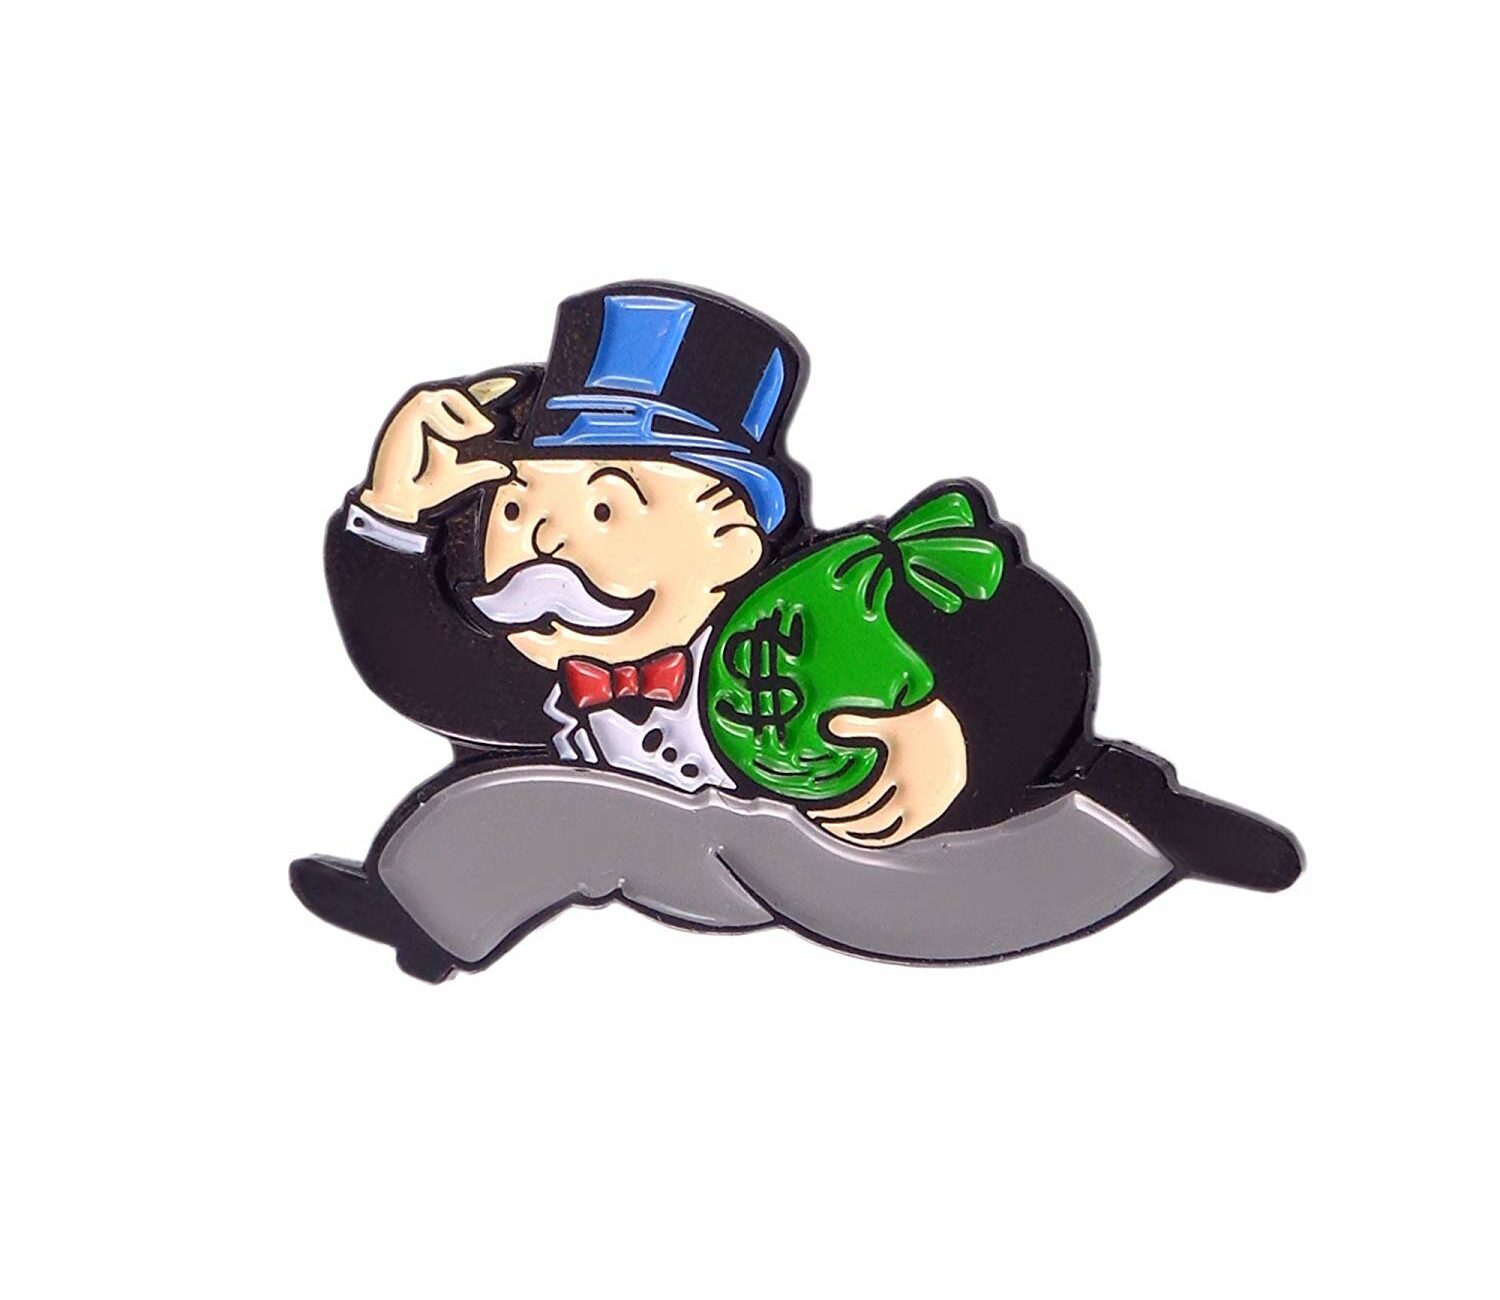 Moneybags character from Monopoly Boardgame